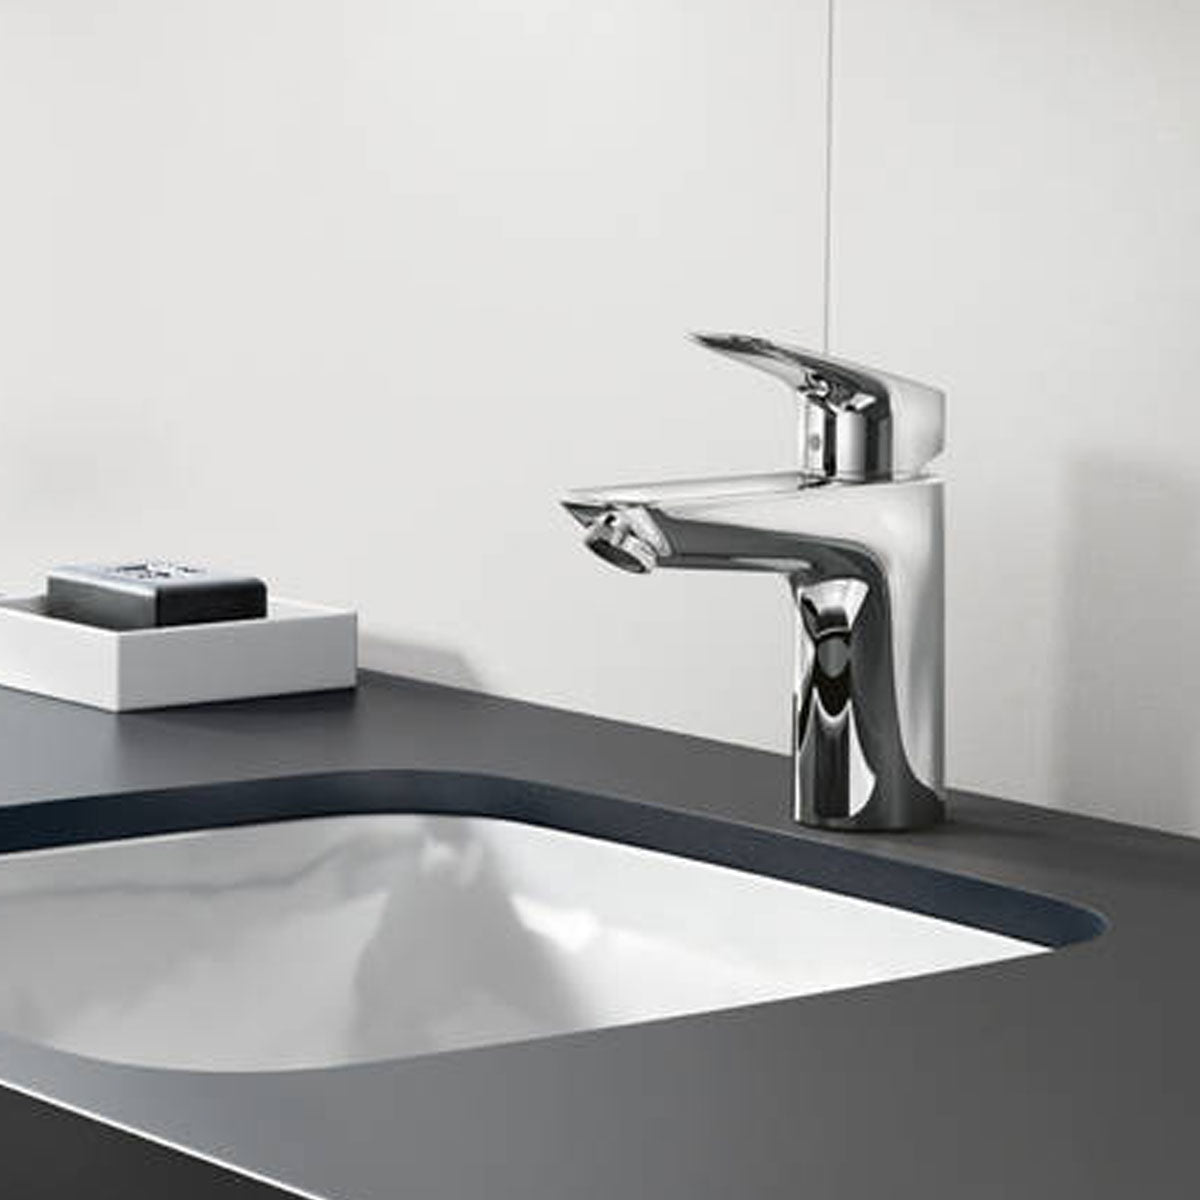 Hansgrohe Logis 100 Single Lever Basin Mixer With Click-Clack Waste